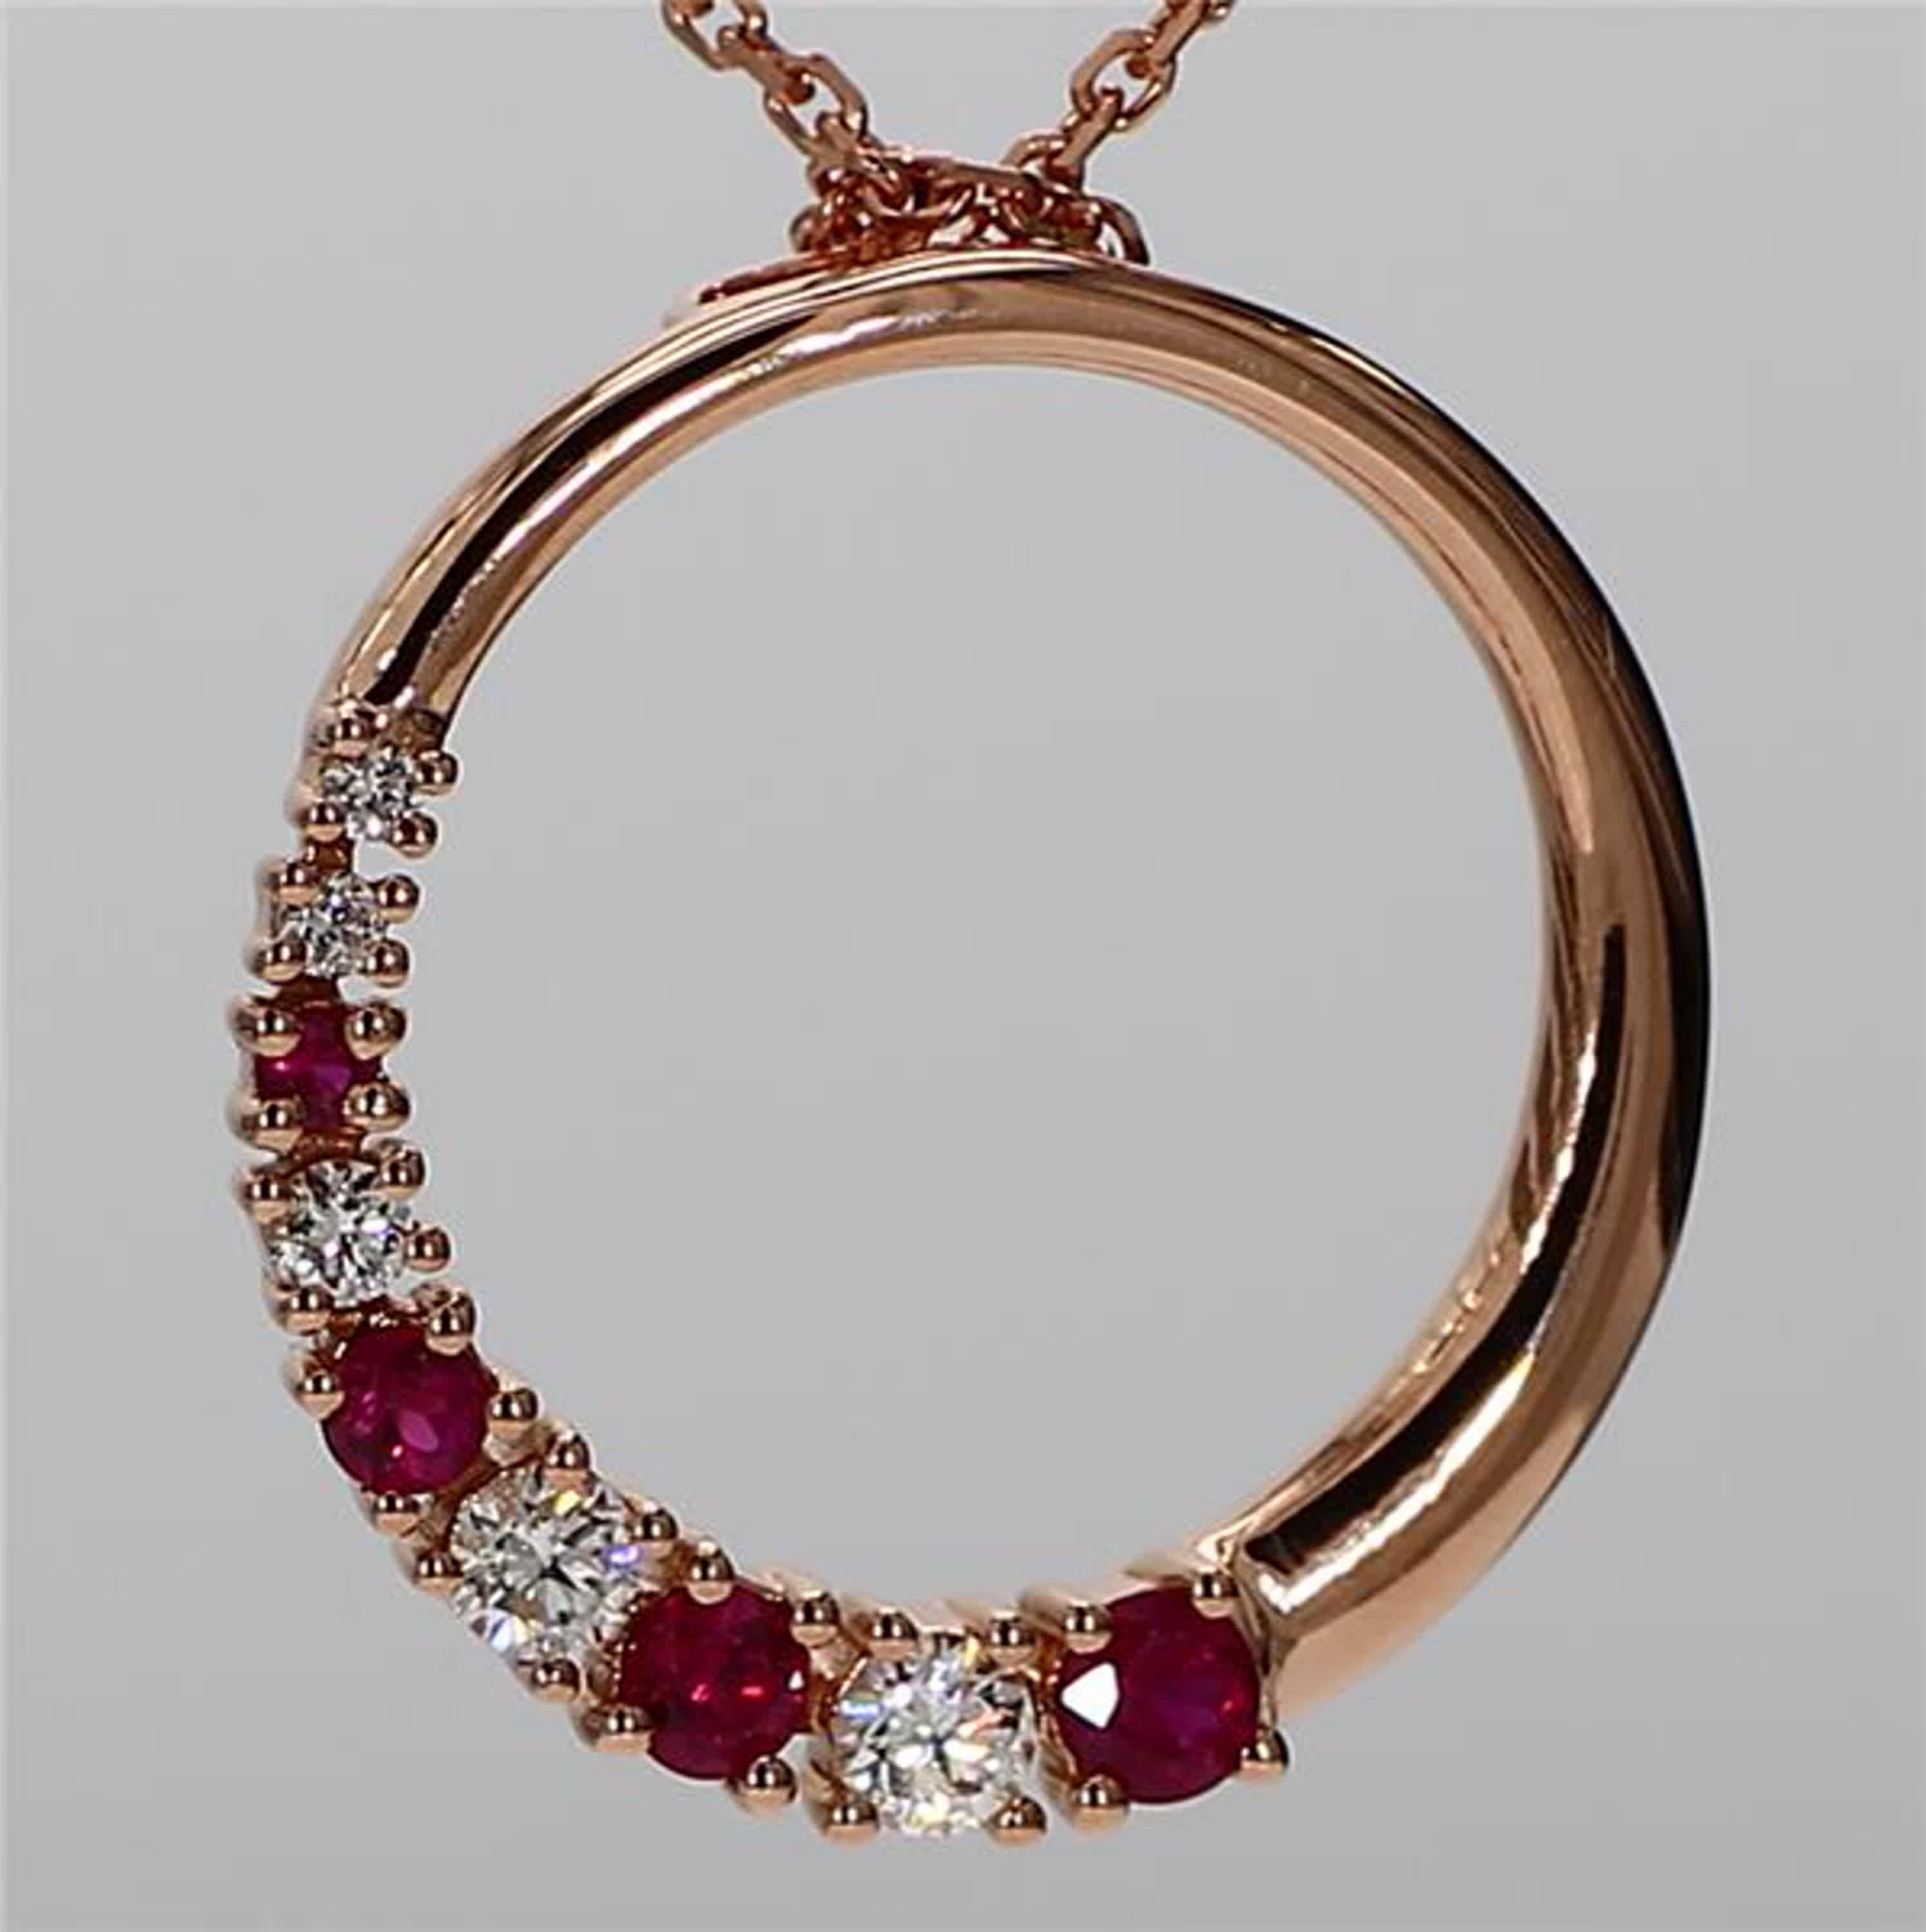 RareGemWorld's classic ruby pendant. Mounted in a beautiful 18K Rose Gold setting with a natural round cut red ruby's complimented by natural round cut white diamond melee. This pendant is guaranteed to impress and enhance your personal